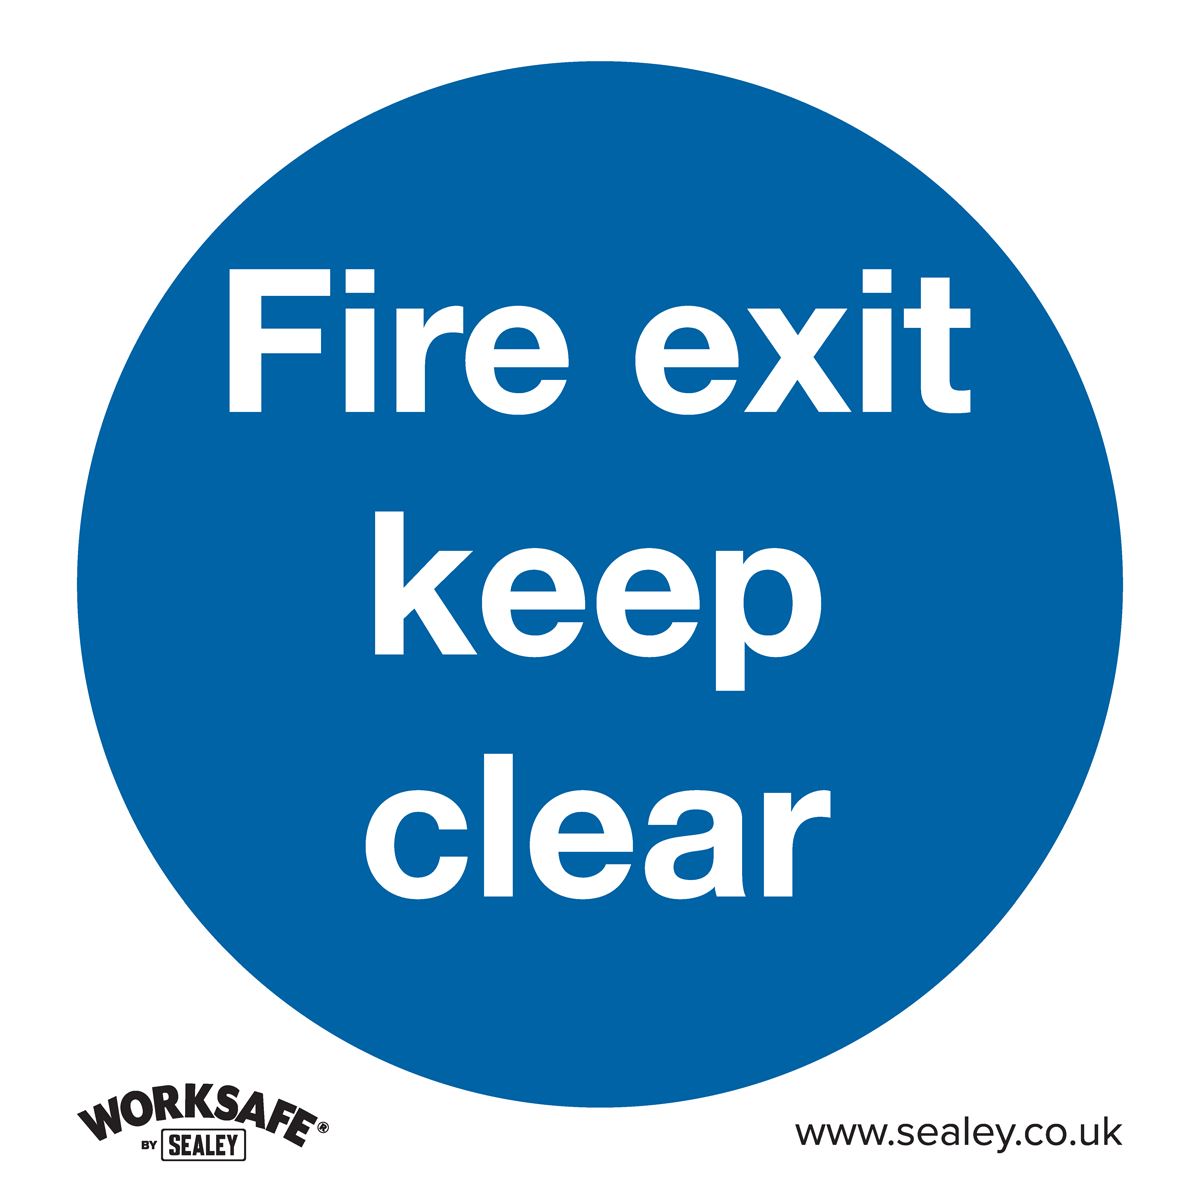 Worksafe by Sealey Mandatory Safety Sign - Fire Exit Keep Clear - Self-Adhesive Vinyl - Pack of 10